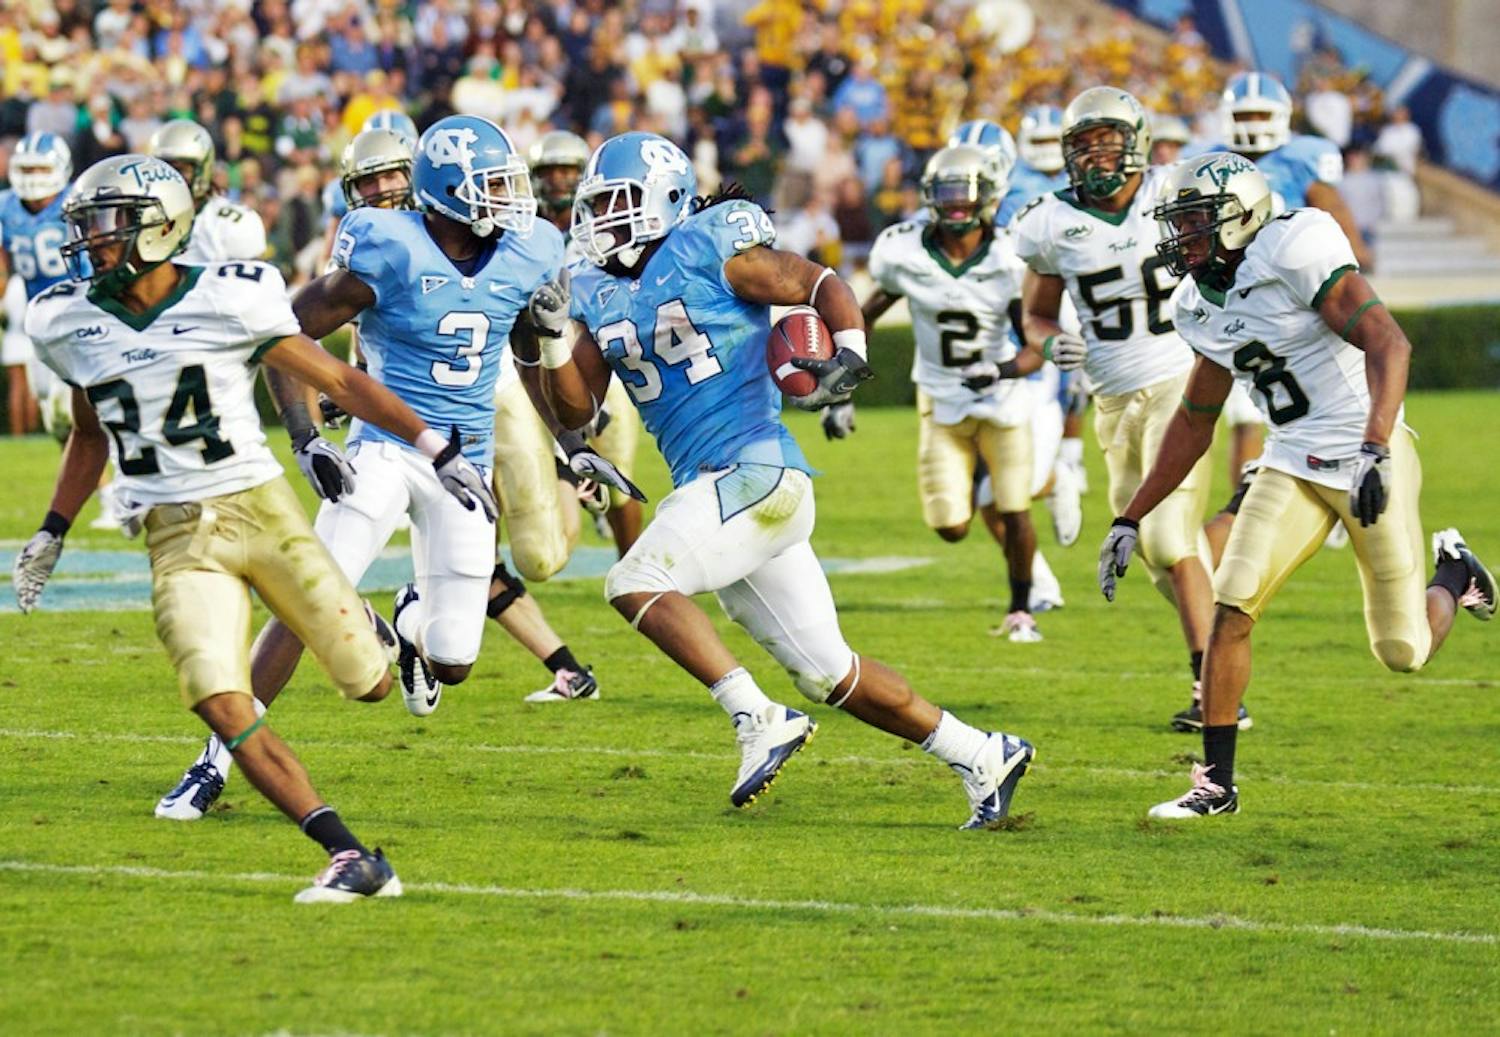 North Carolina senior tailback Johnny White zig zags his way en route to his 67-yard touchdown in the fourth quarter of Saturday’s game against William &amp; Mary. White tallied a career-high 164 yards on 29 carries. It was this go-ahead touchdown that put UNC back on top after being down by 10 points entering the final 15 minutes. 